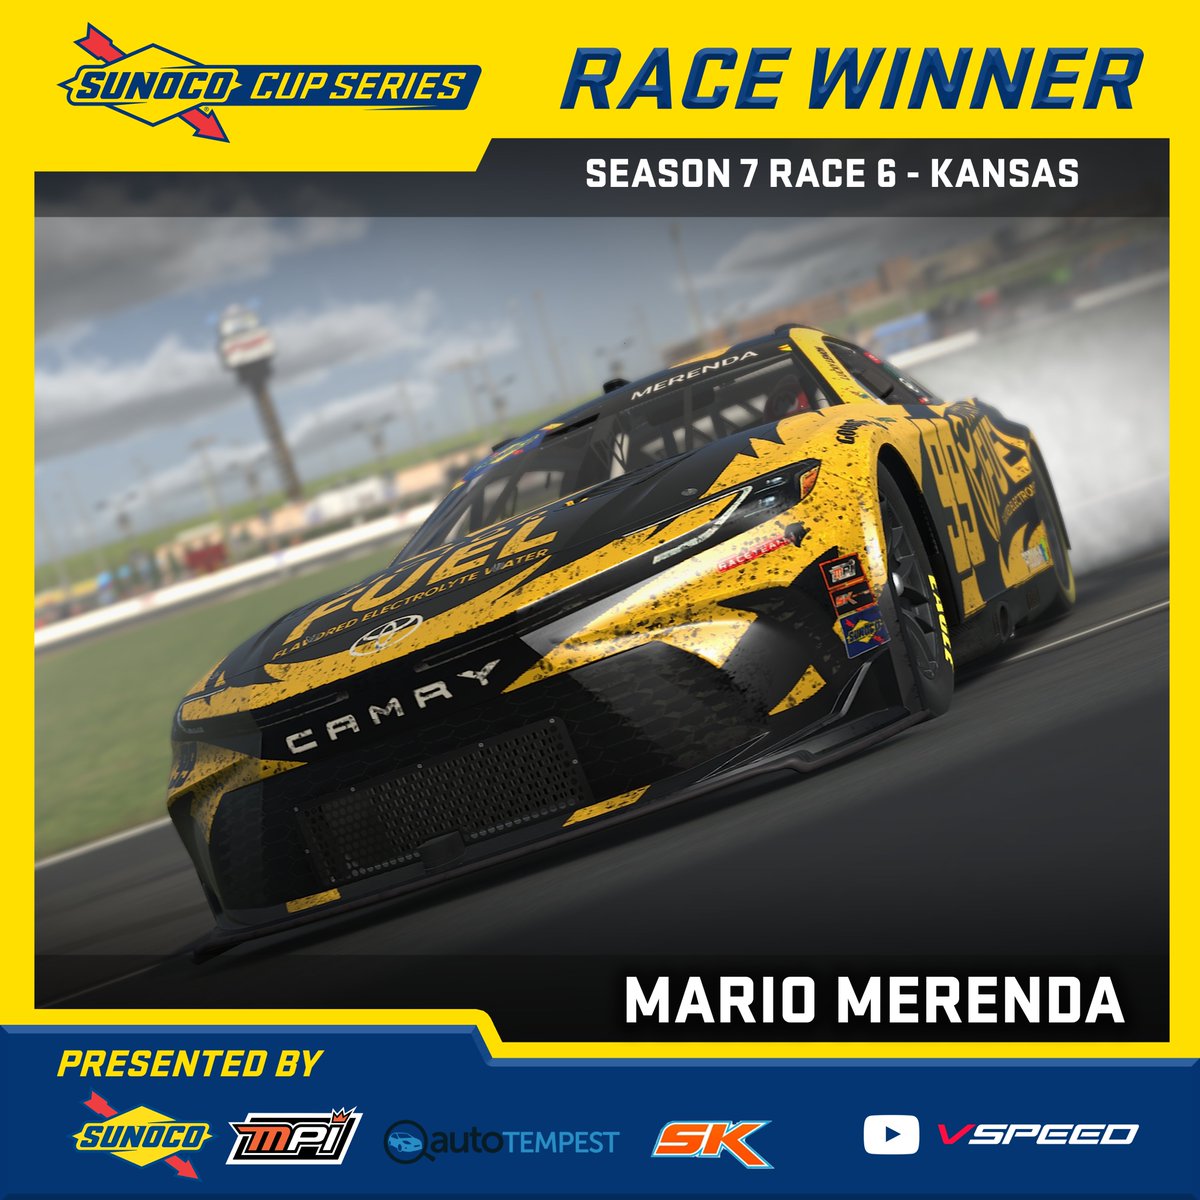 Mario Merenda takes the checkered flag at Kansas! No photo finish here as he wins by over 5 seconds! Eddie Smith and Jessie Whittington round out the podium.